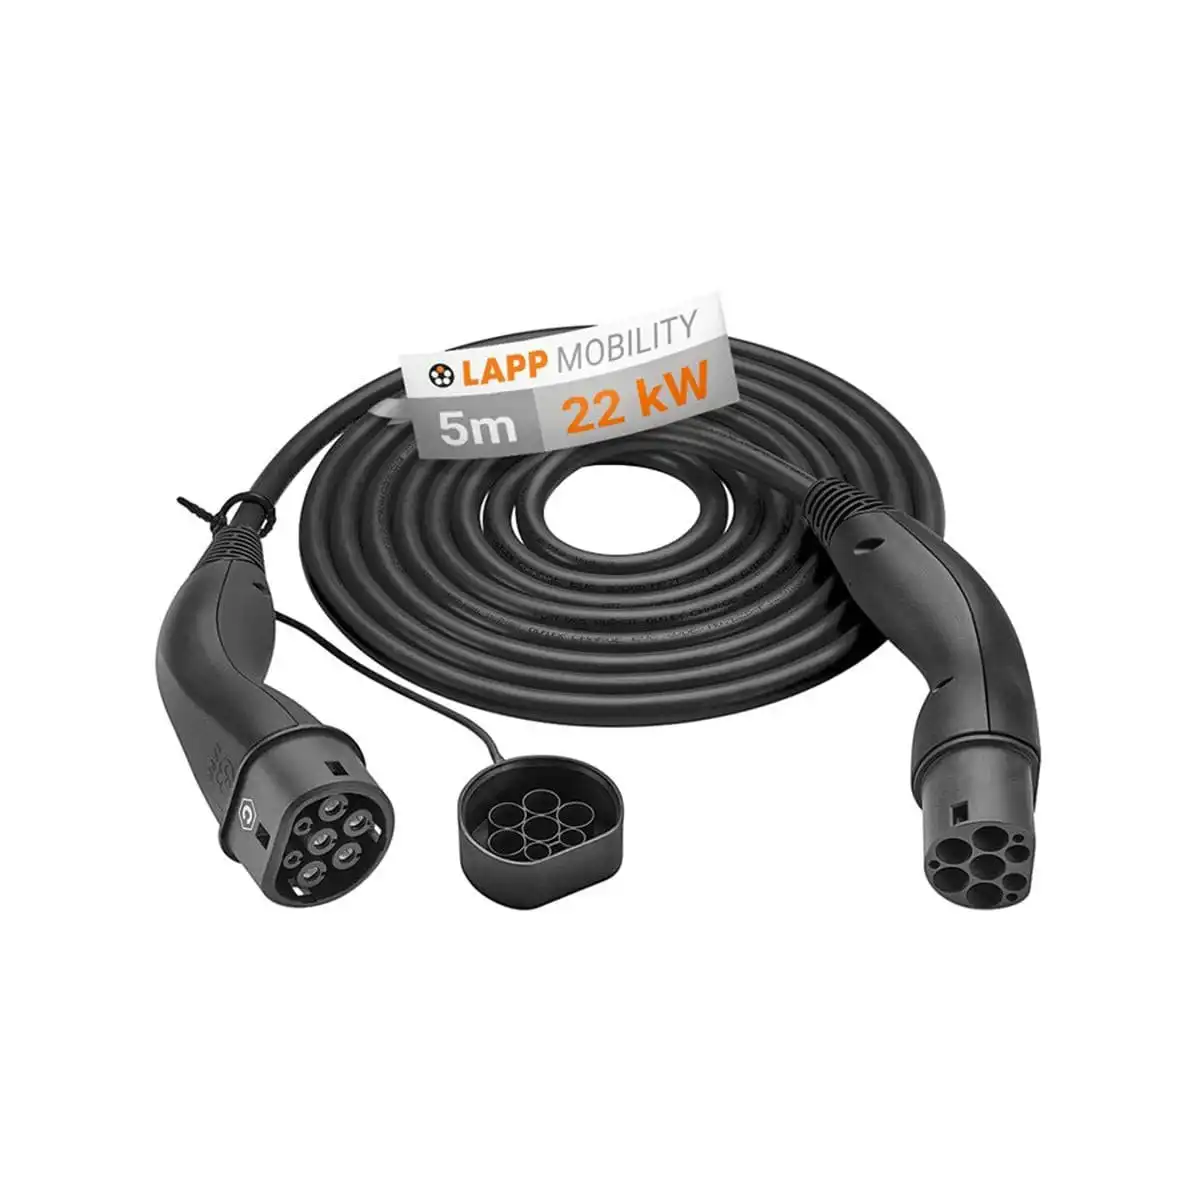 LAPP EV Helix Charge Cable Type 2 (22kW-3P-32A) 5m for Hybrid and Electric Cars - Black